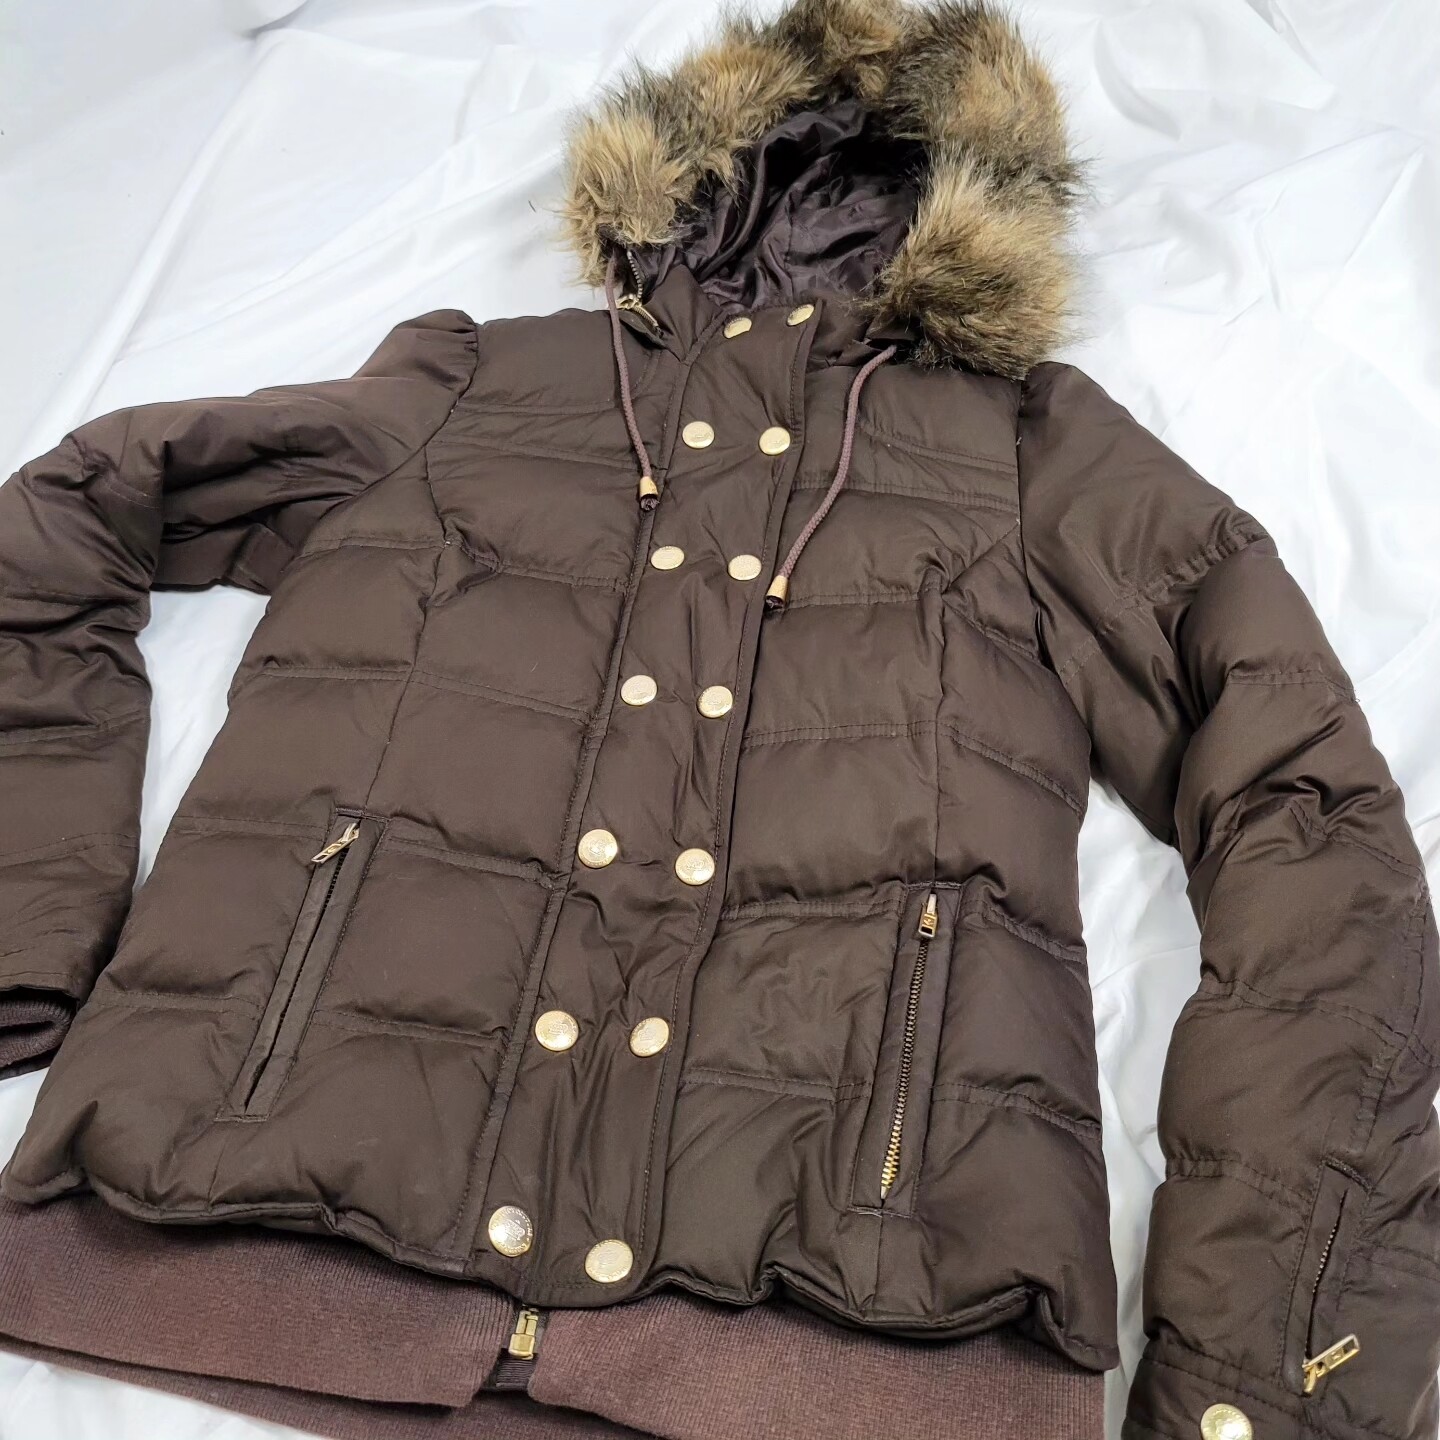 Juicy Couture Puffer Jacket with faux fur trim